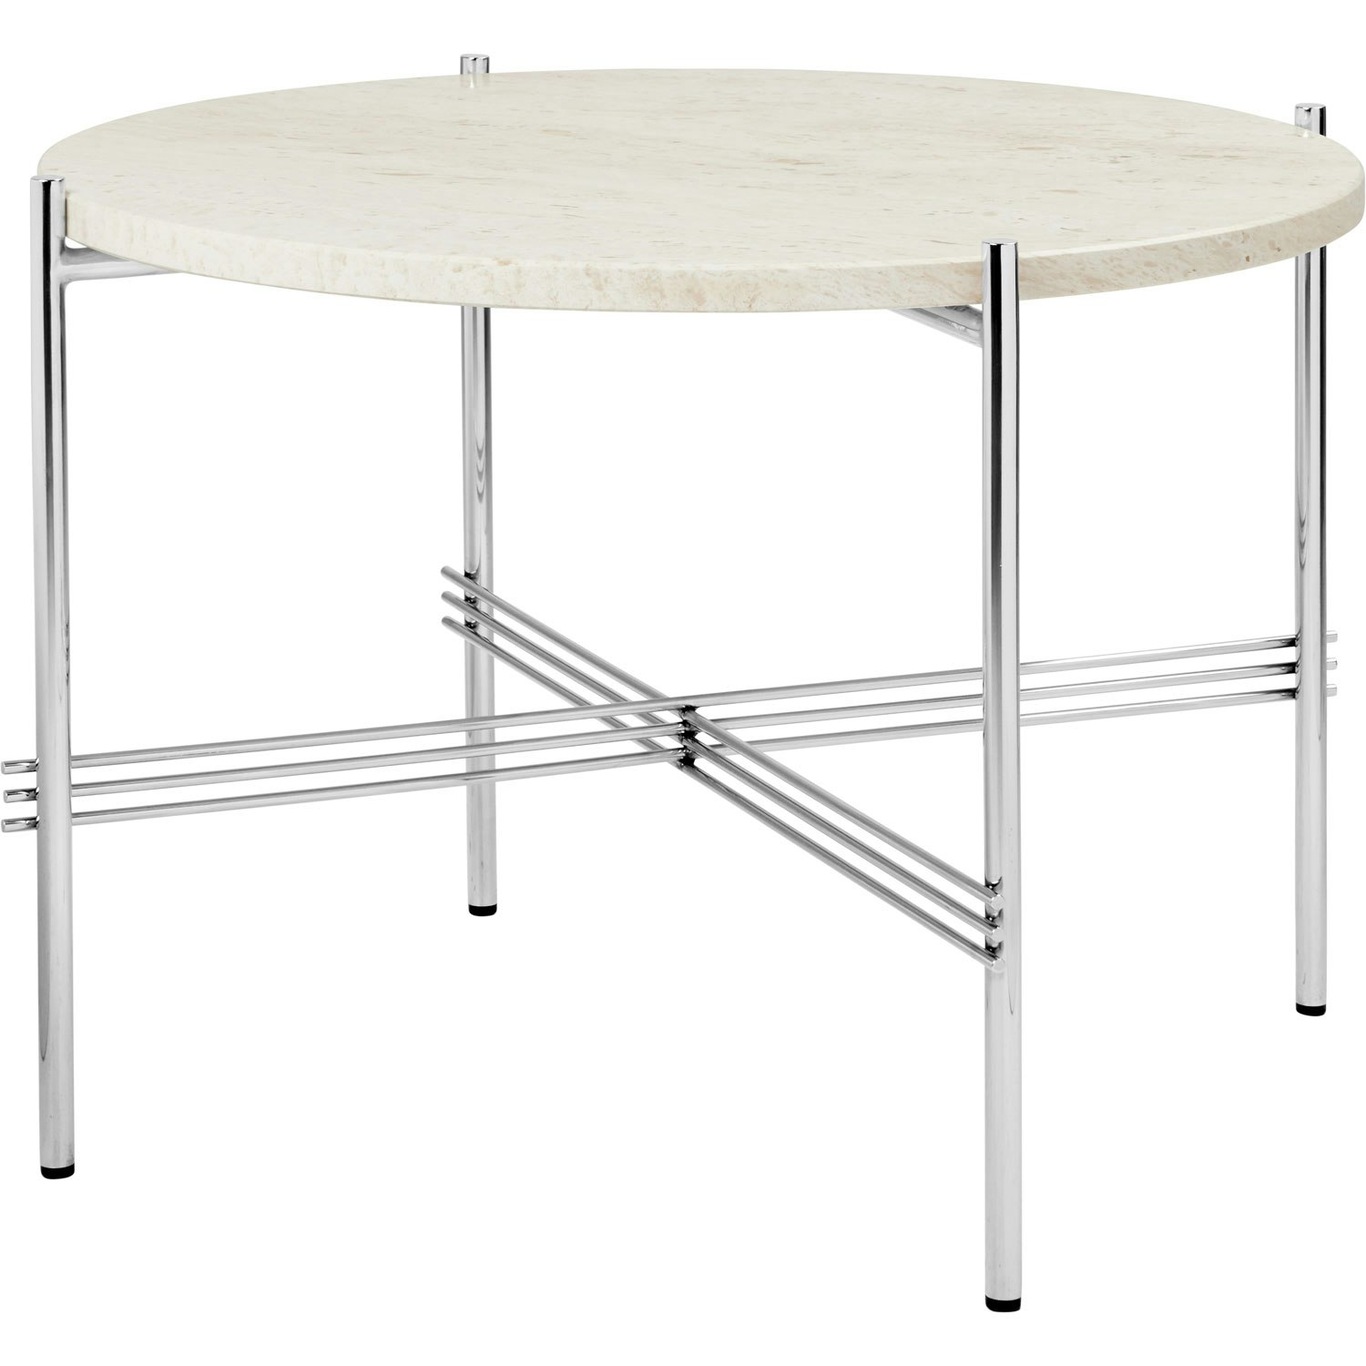 TS Coffee Table 55 cm, Polished Steel / Neutral white Travertine